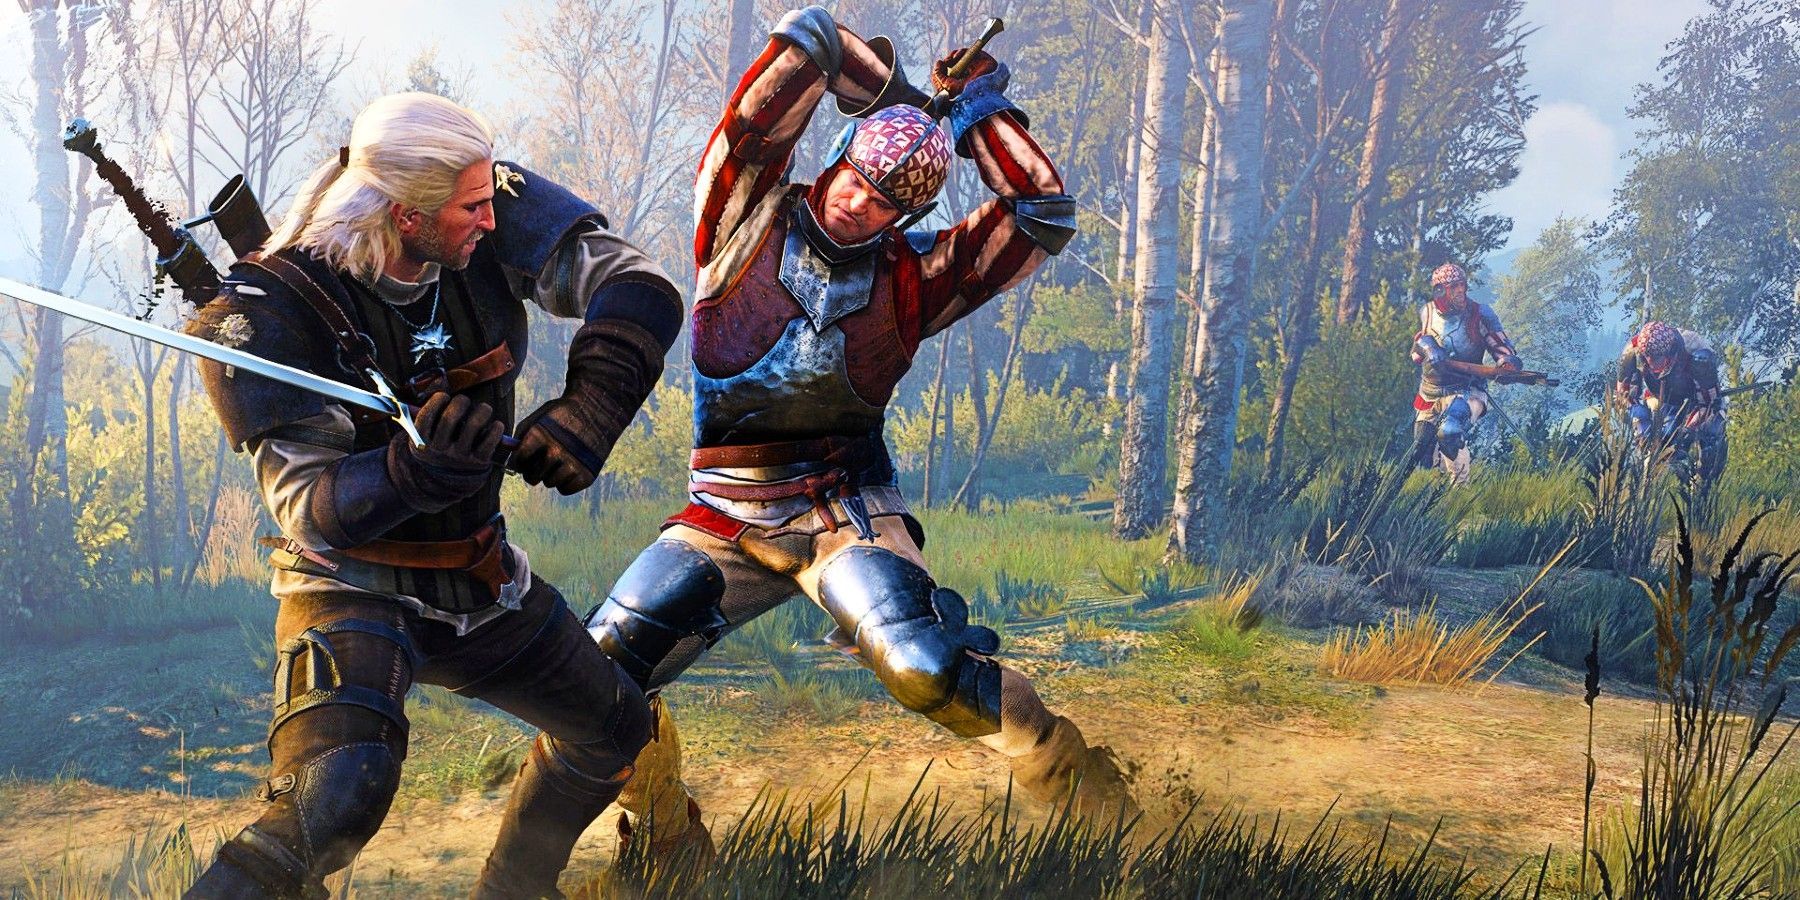 geralt swinging his sword at a soldier